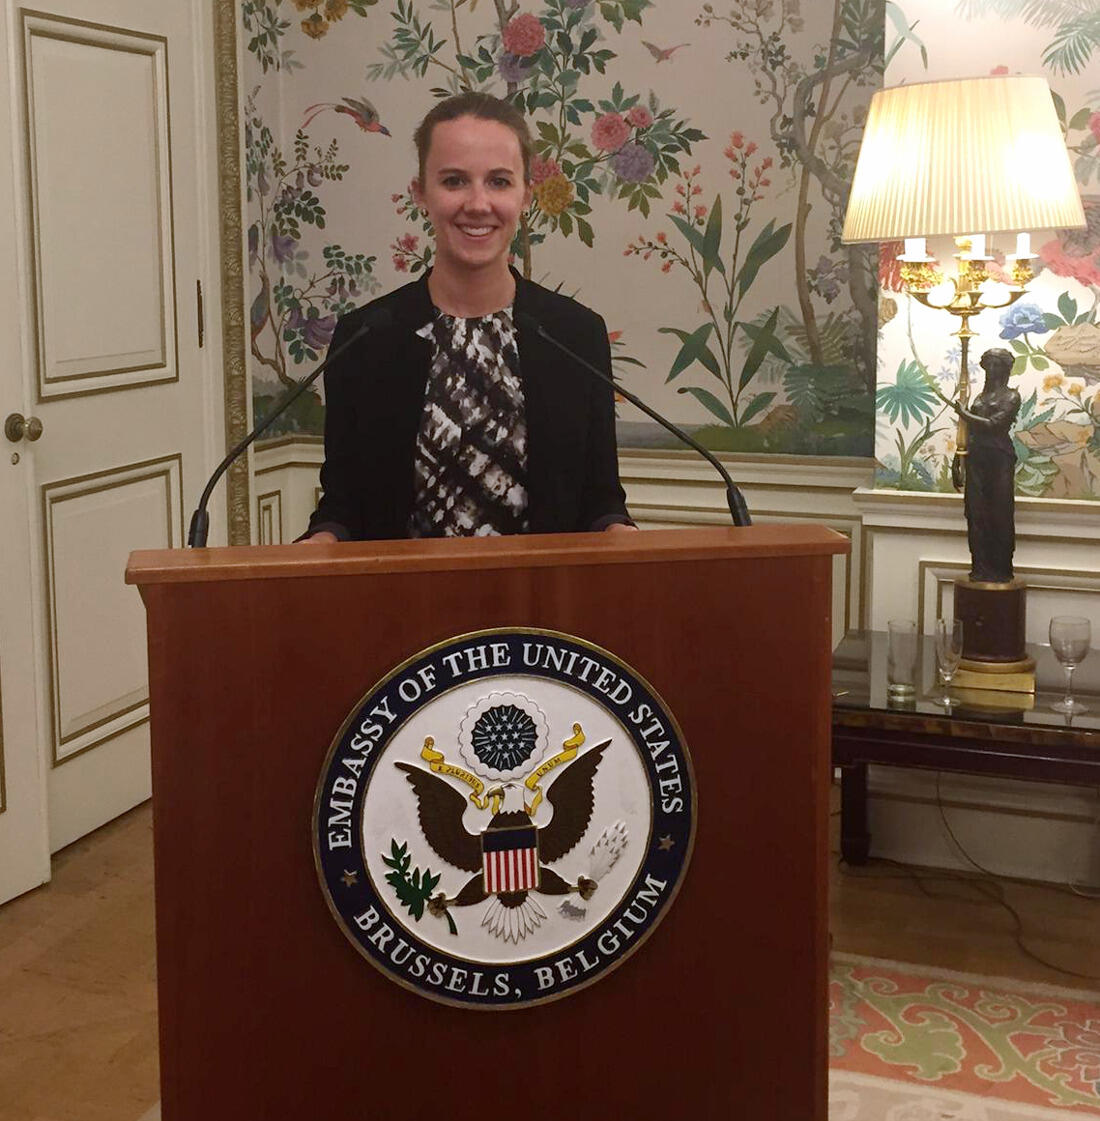 Sarah Carrier tries out the podium at the U.S. Embassy in Brussels.